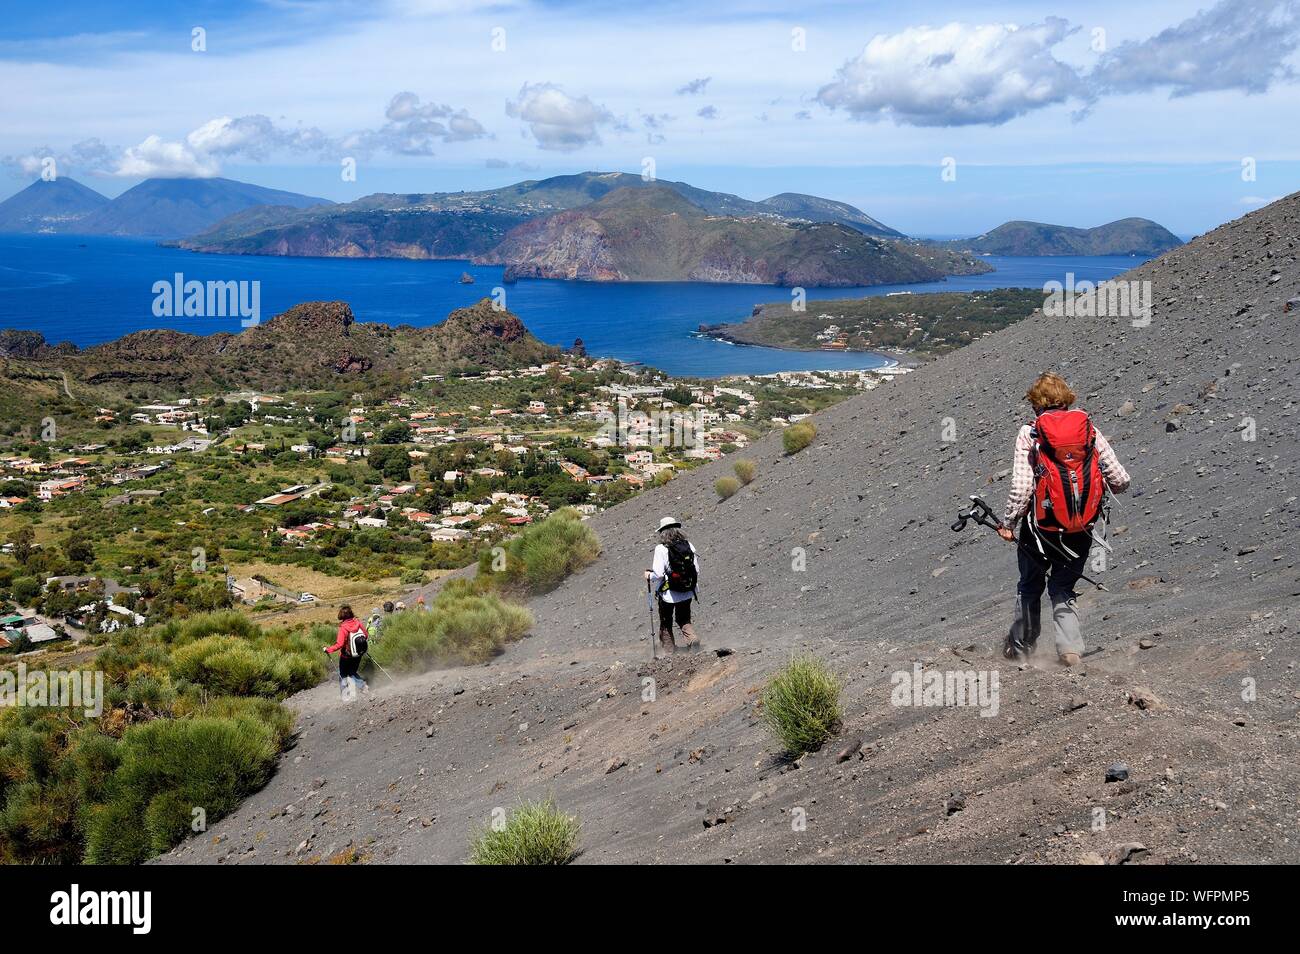 Italy, Sicily, Aeolian Islands, listed as World Heritage by UNESCO, Vulcano Island, hikers on the flanks of the crater of volcano della Fossa, Lipari Island in the background Stock Photo